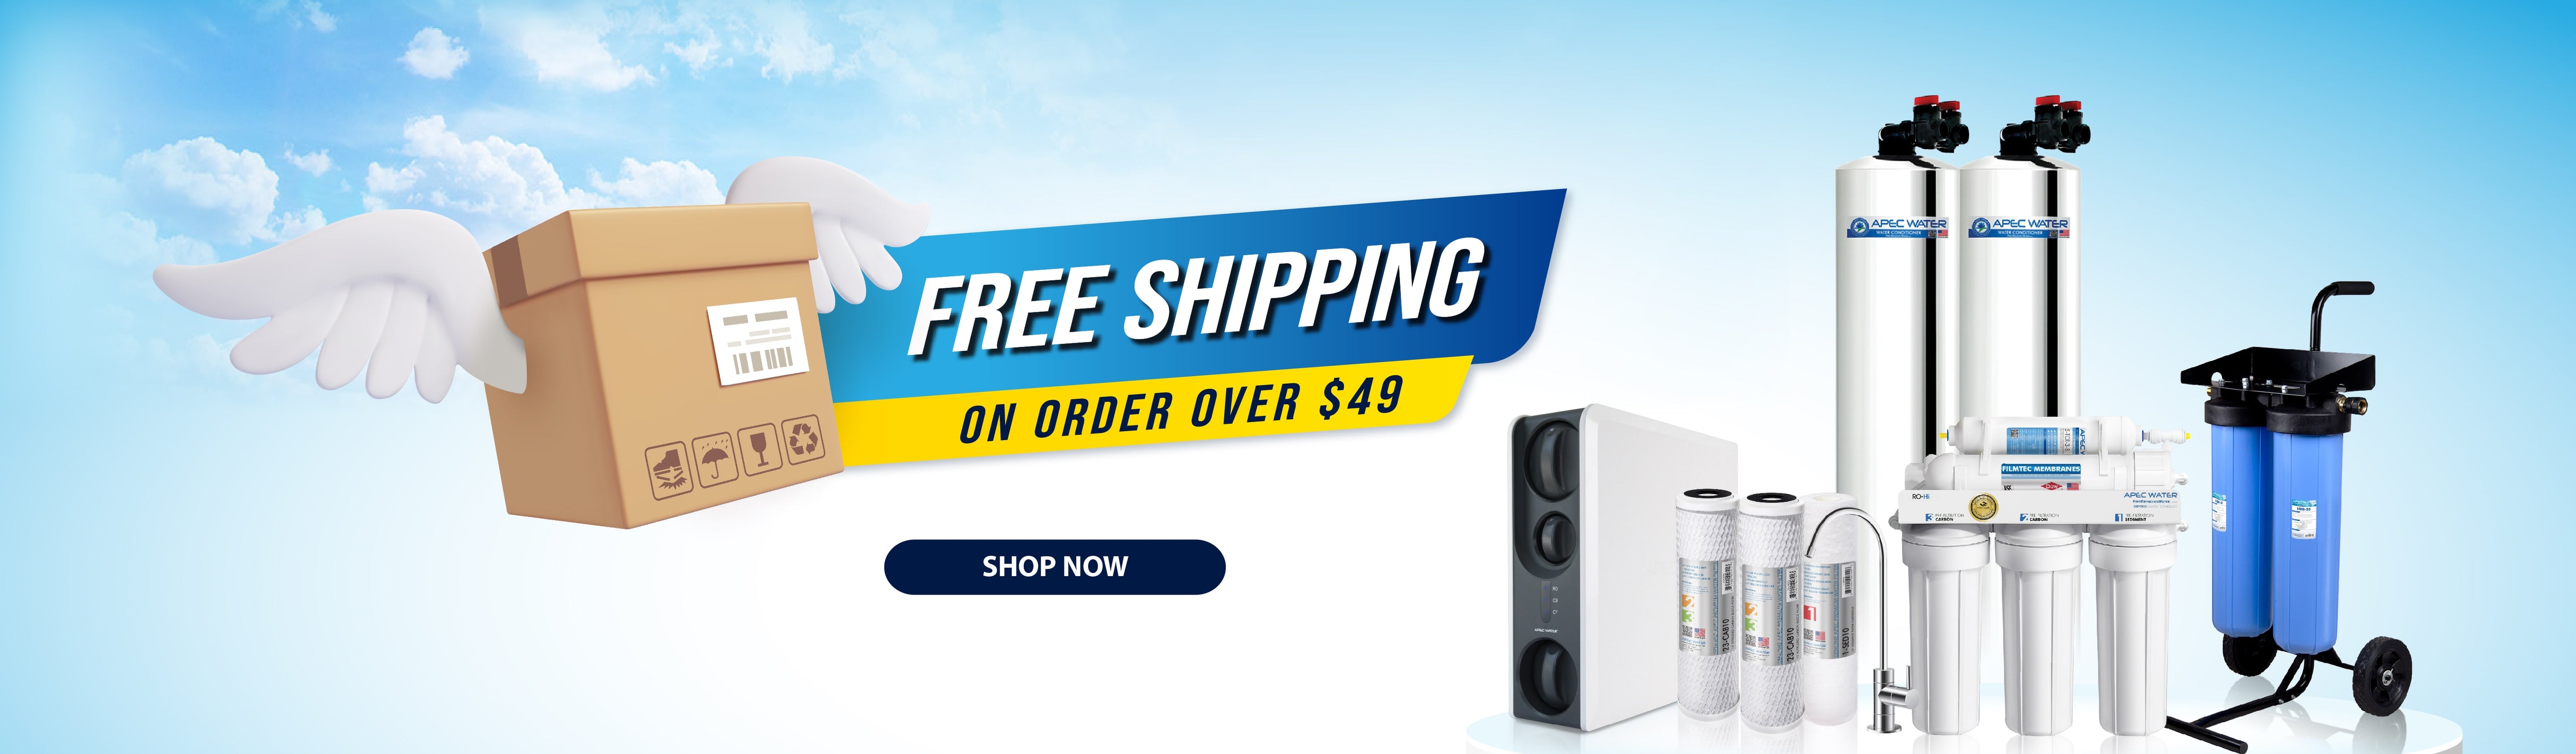 APEC Water free shipping homepage banner